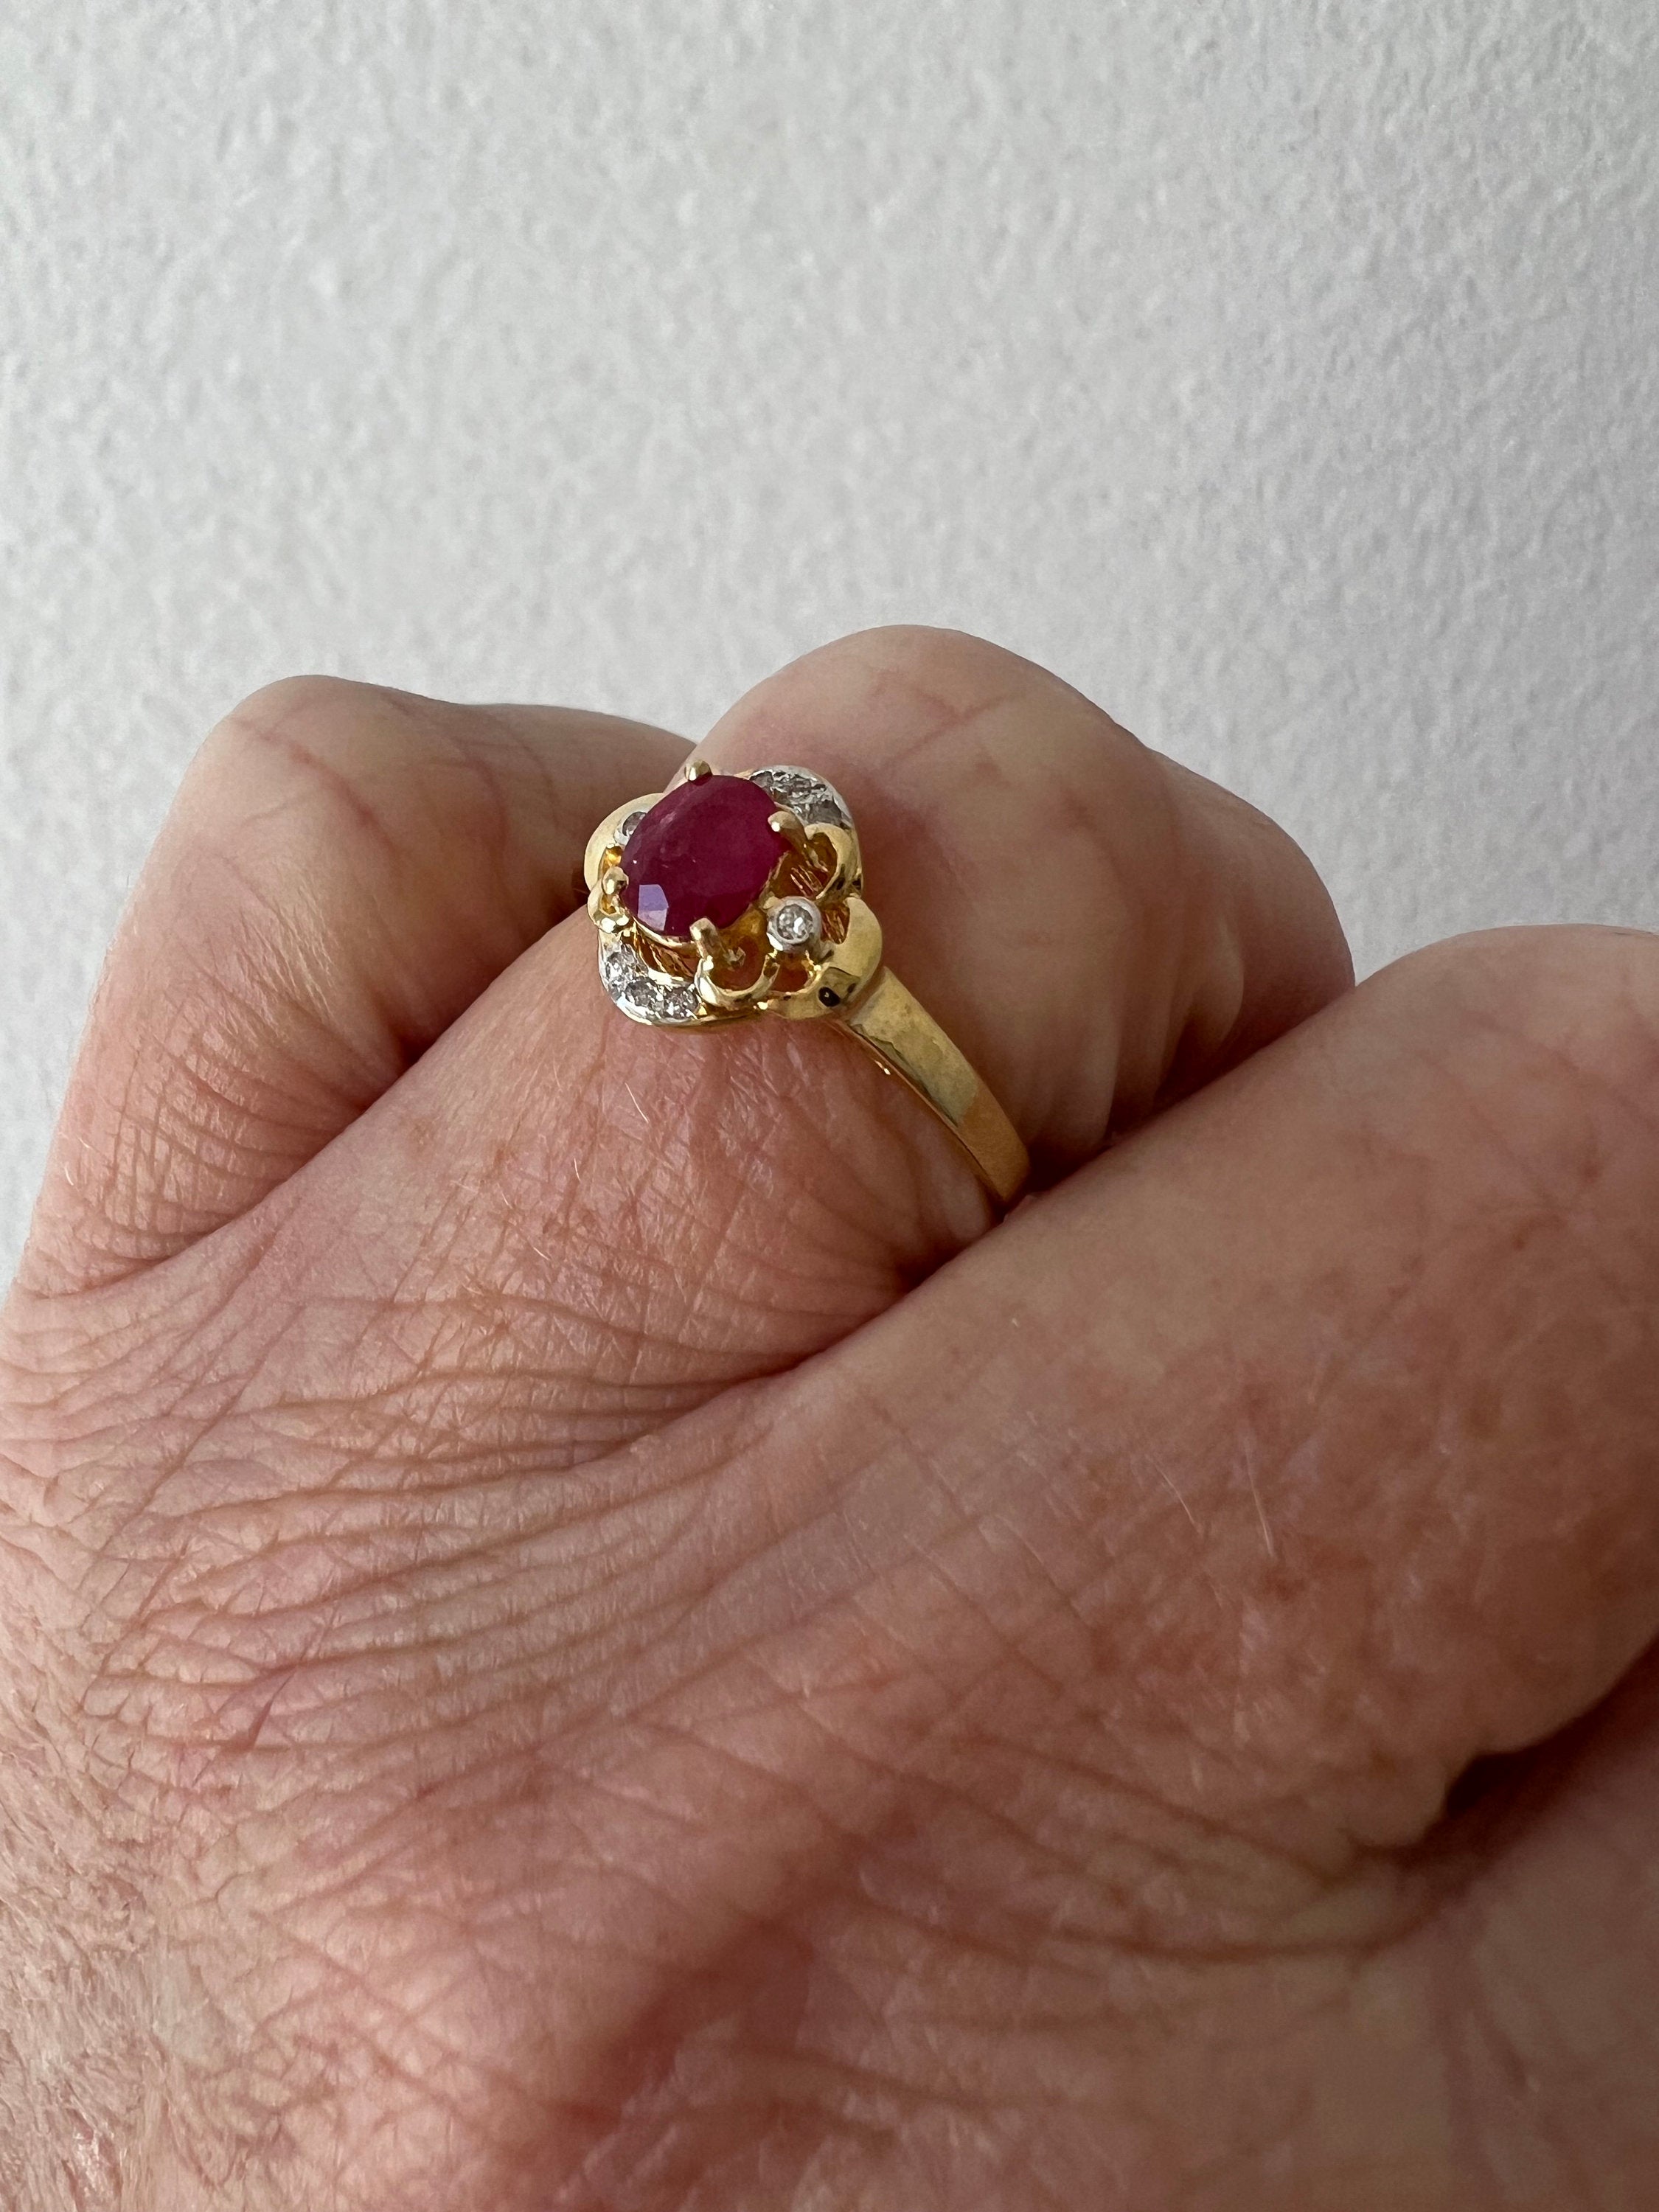 Vintage 14K Yellow Gold Ruby and Diamond Ring Engagement Ring.